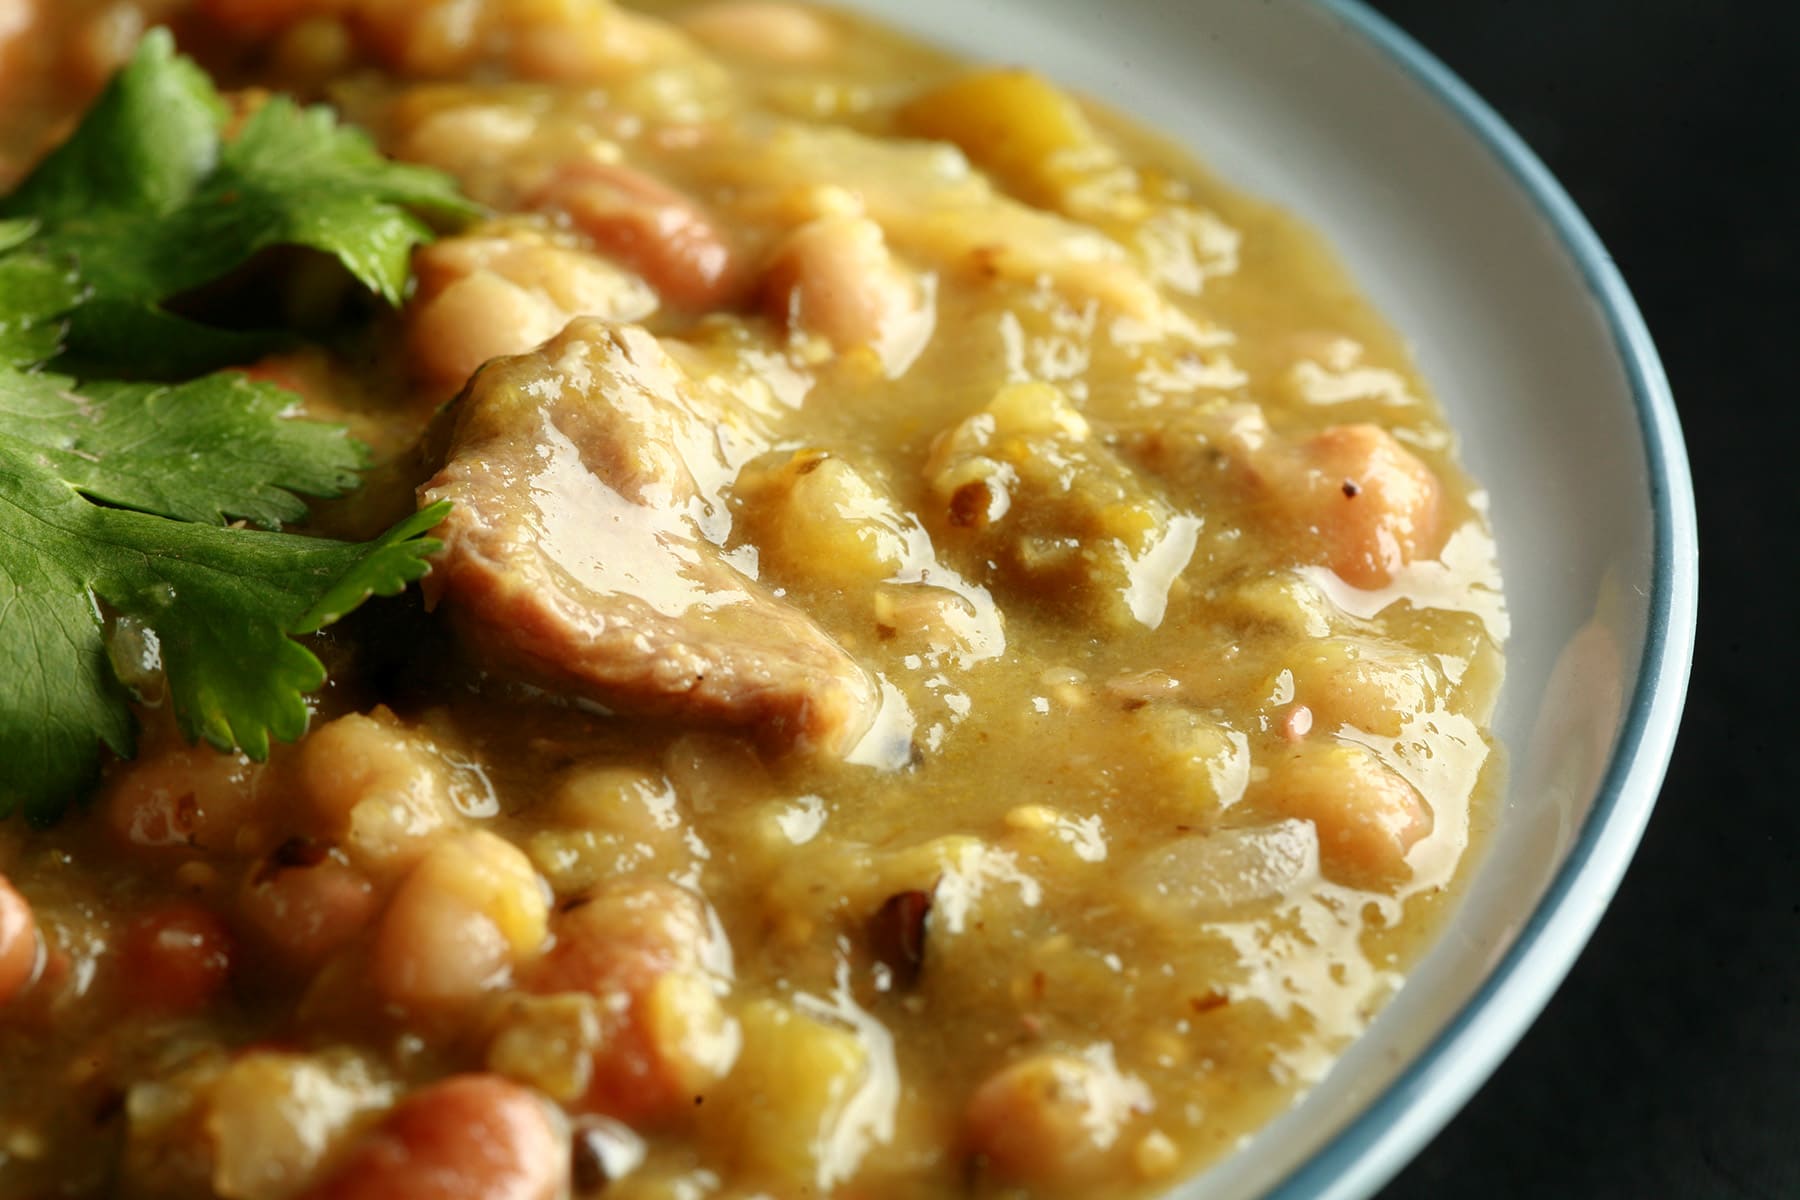 A close  up view of a bowl of roasted green chili.